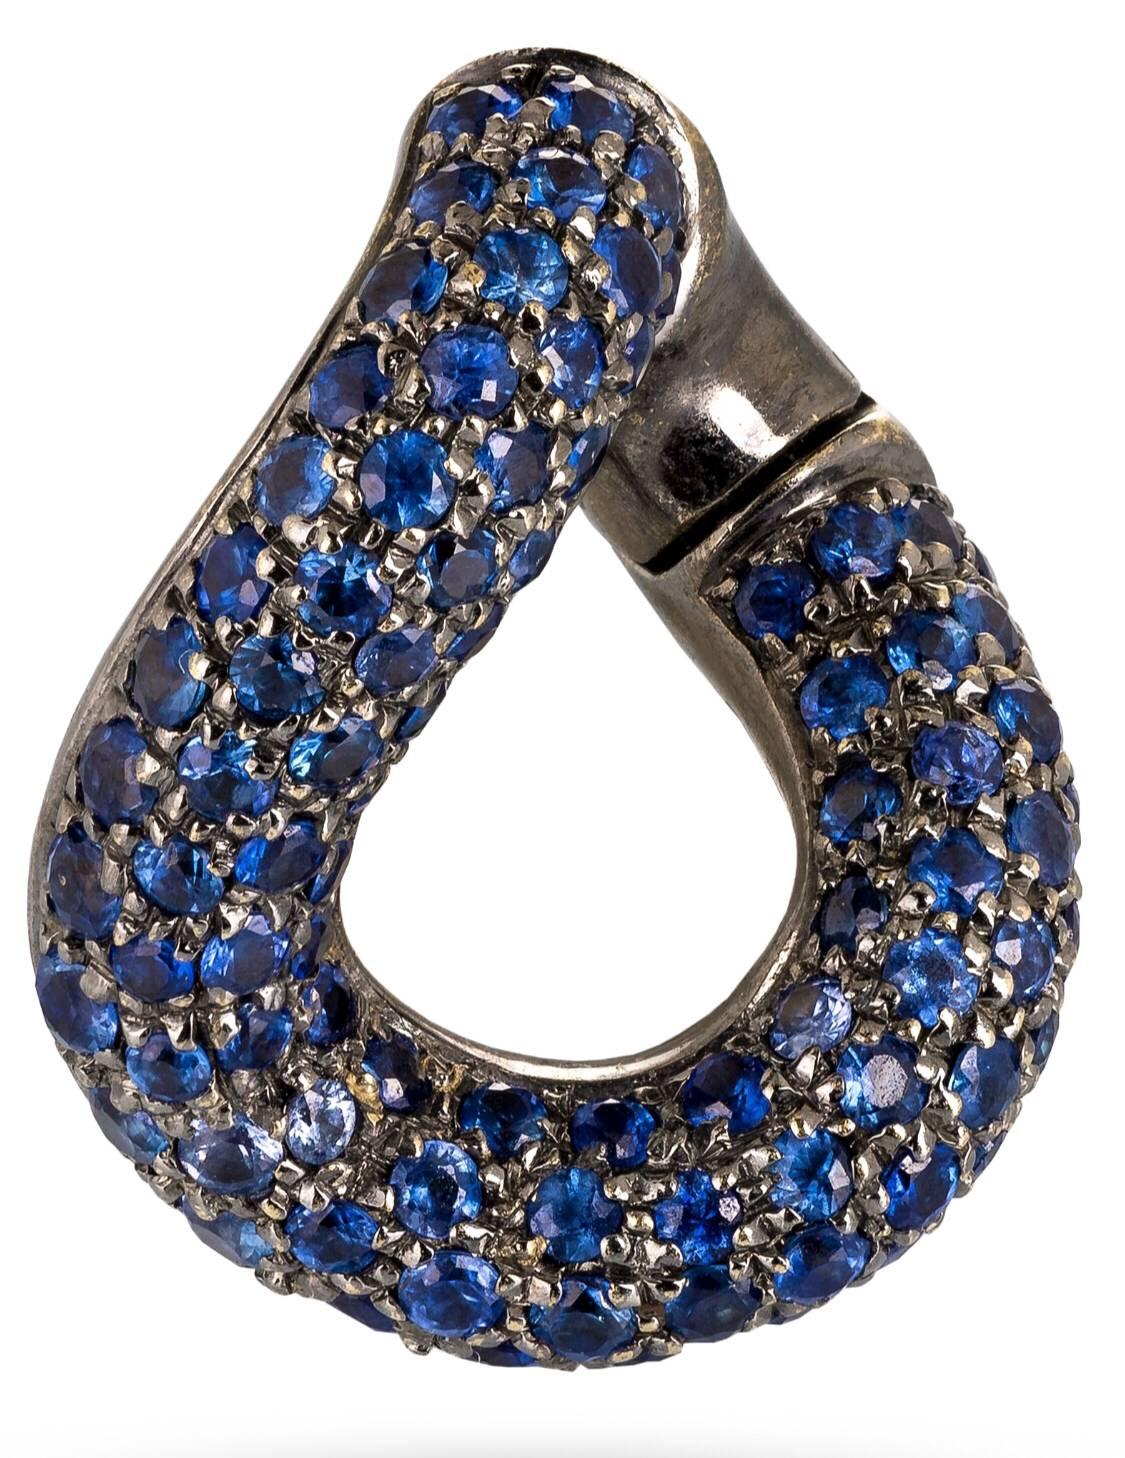 Pomellato Earrings Made of Rhodium Treated 18K White Gold Paved with Stunning Blue Sapphire Stones Approximately 3 Carats.
Marked: Pomellato, 750